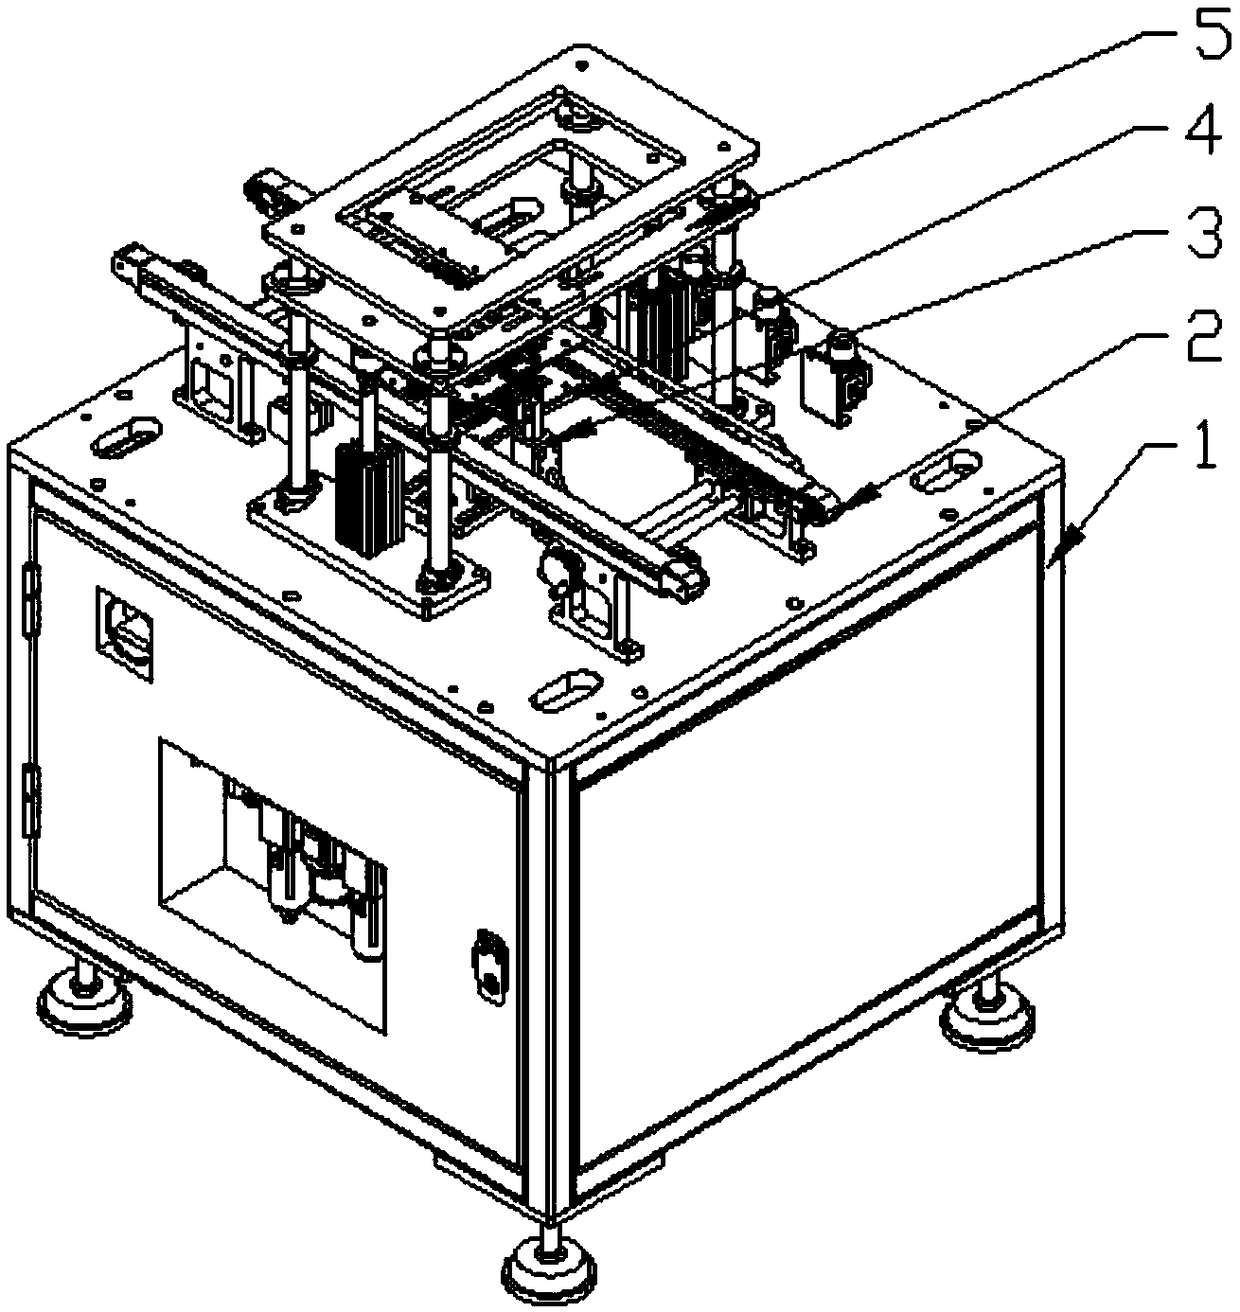 Assembly machine with plug-in mechanism